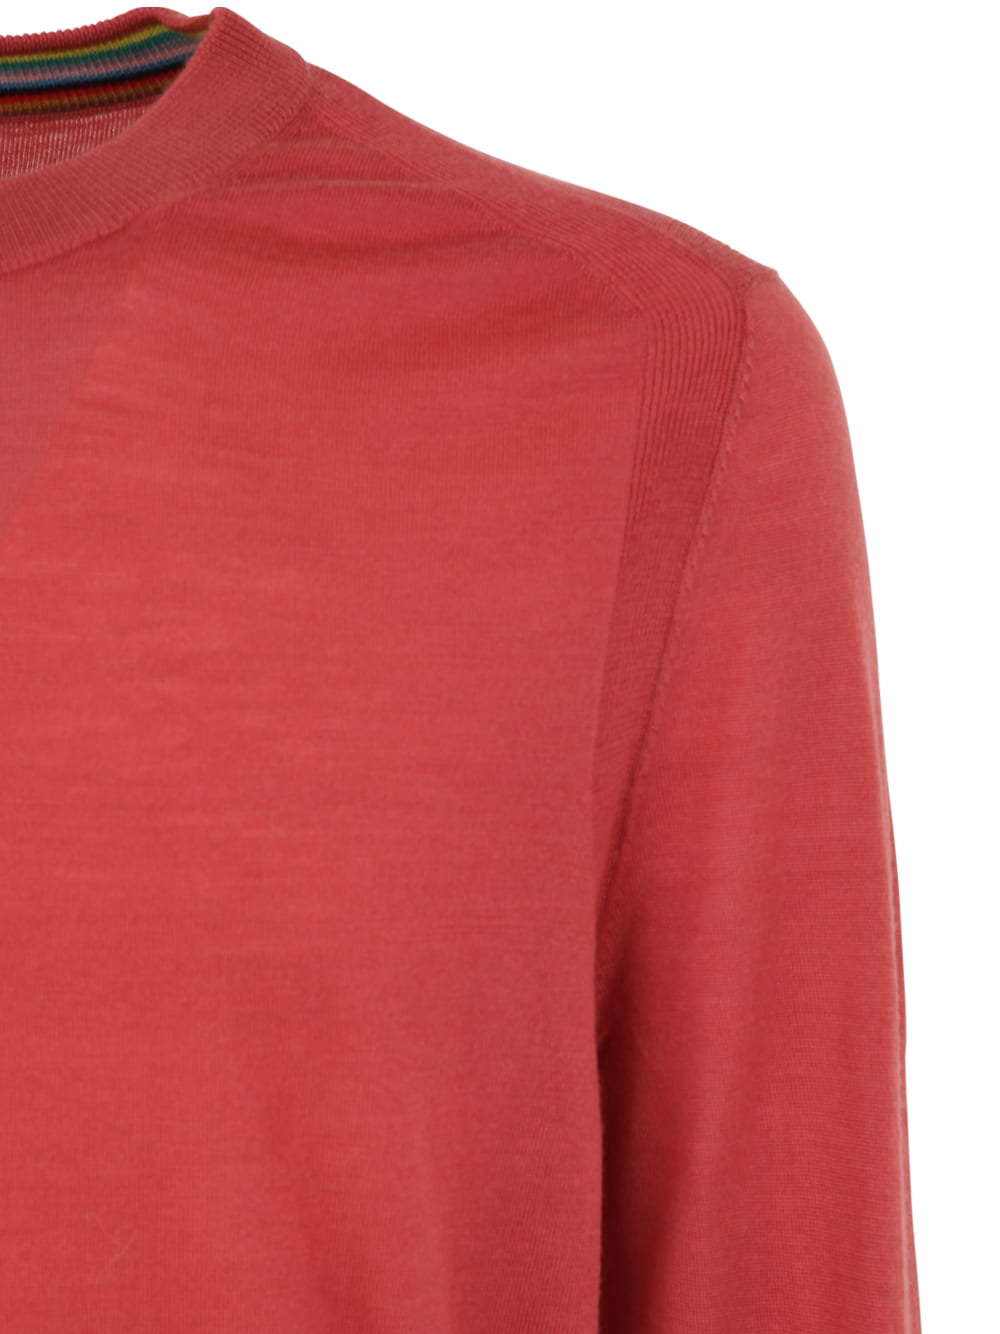 Shop Paul Smith Mens Sweater Crew Neck In Reds